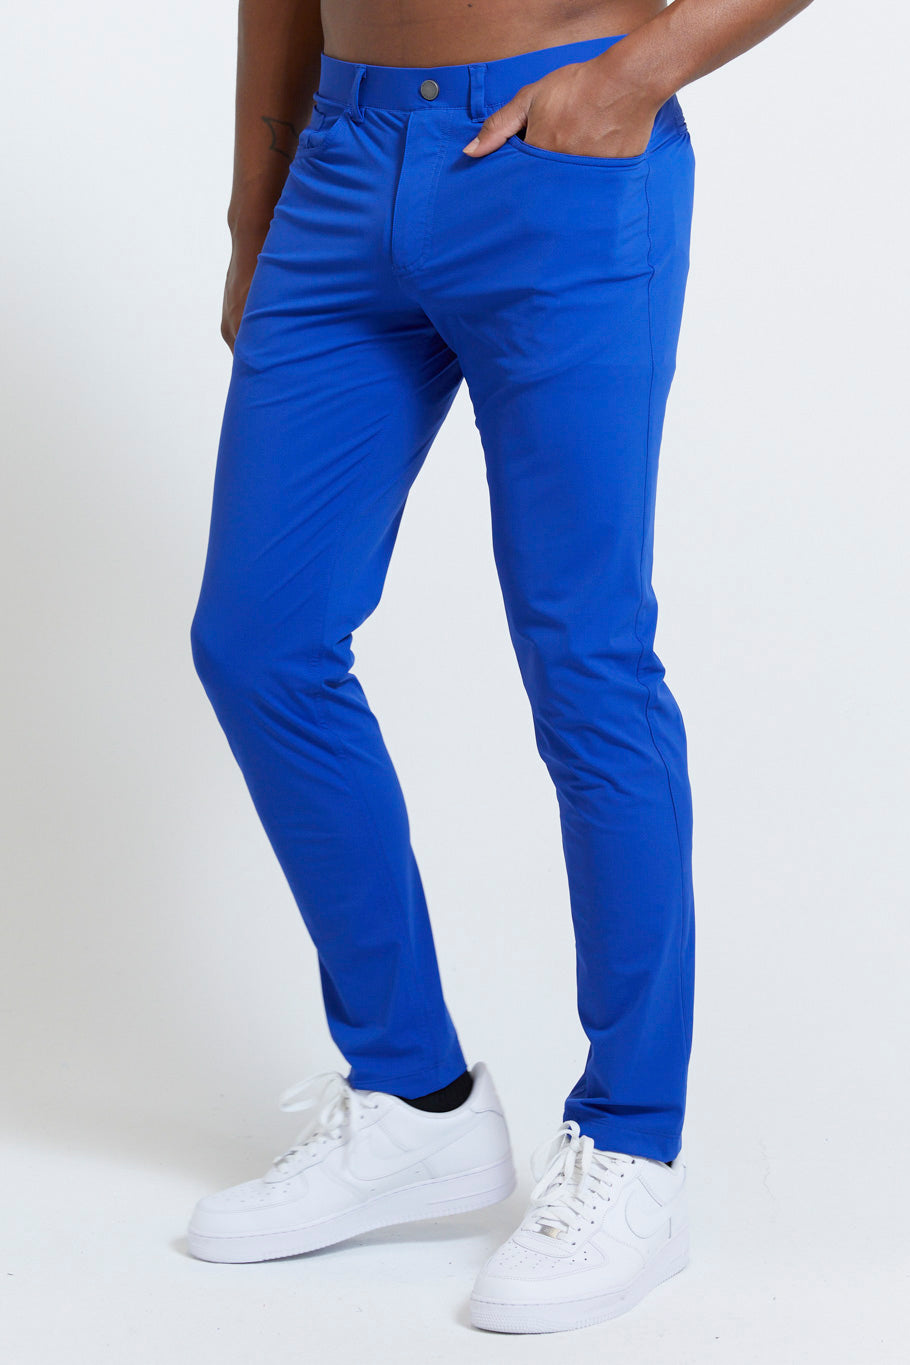 Image of the kent pull-on trouser in olympic